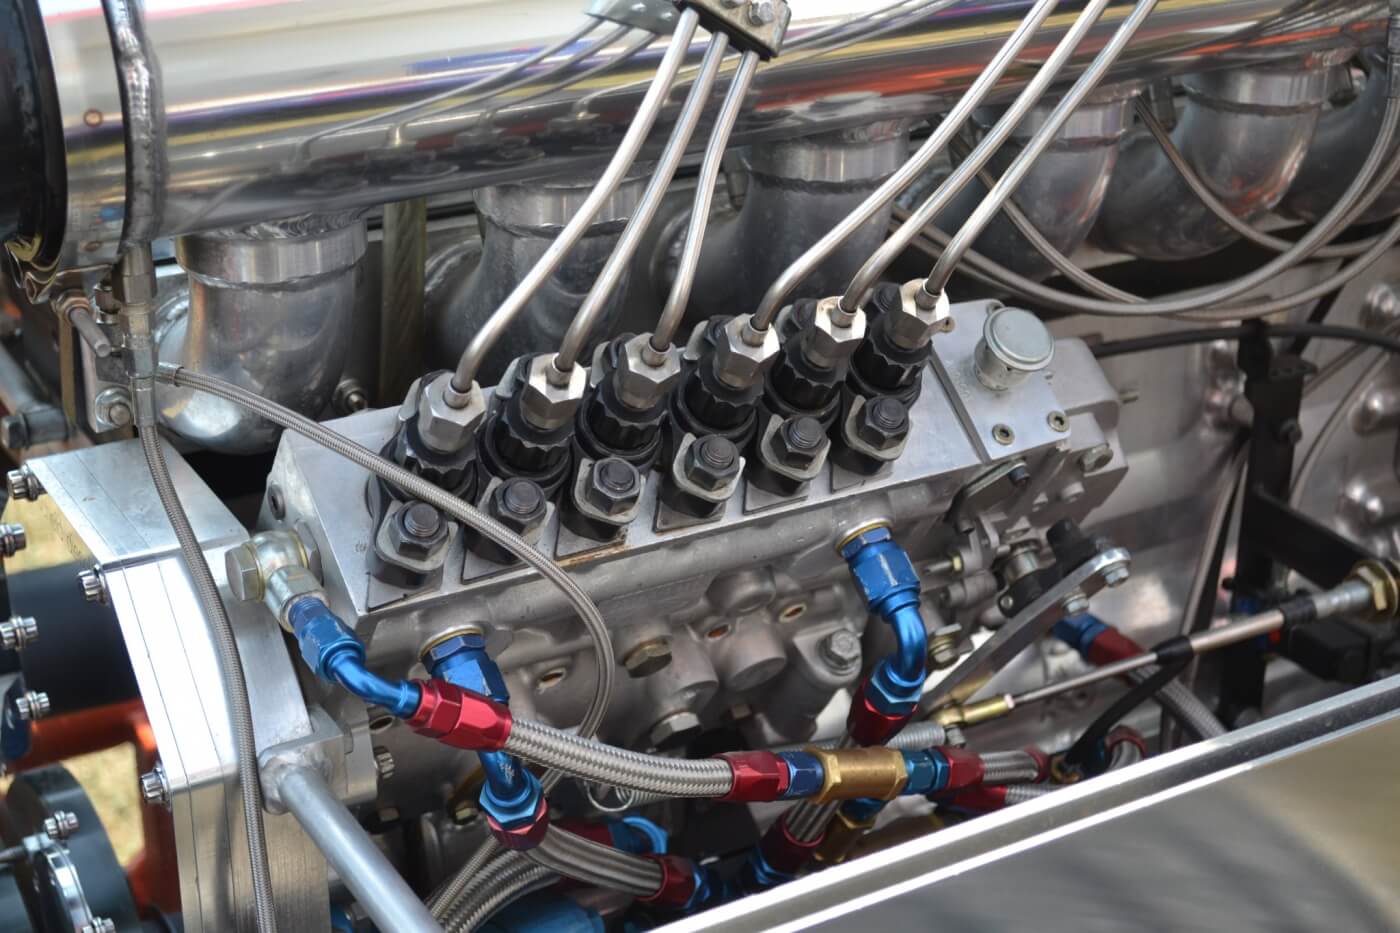 16. As this piece is being written, even more advancements are being made in the all-out $100,000 race engines that use this type of injection pump. With more than 3,000 horsepower from less than 400 cubic inches, modern diesel pulling engines are some of the most advanced on the planet.